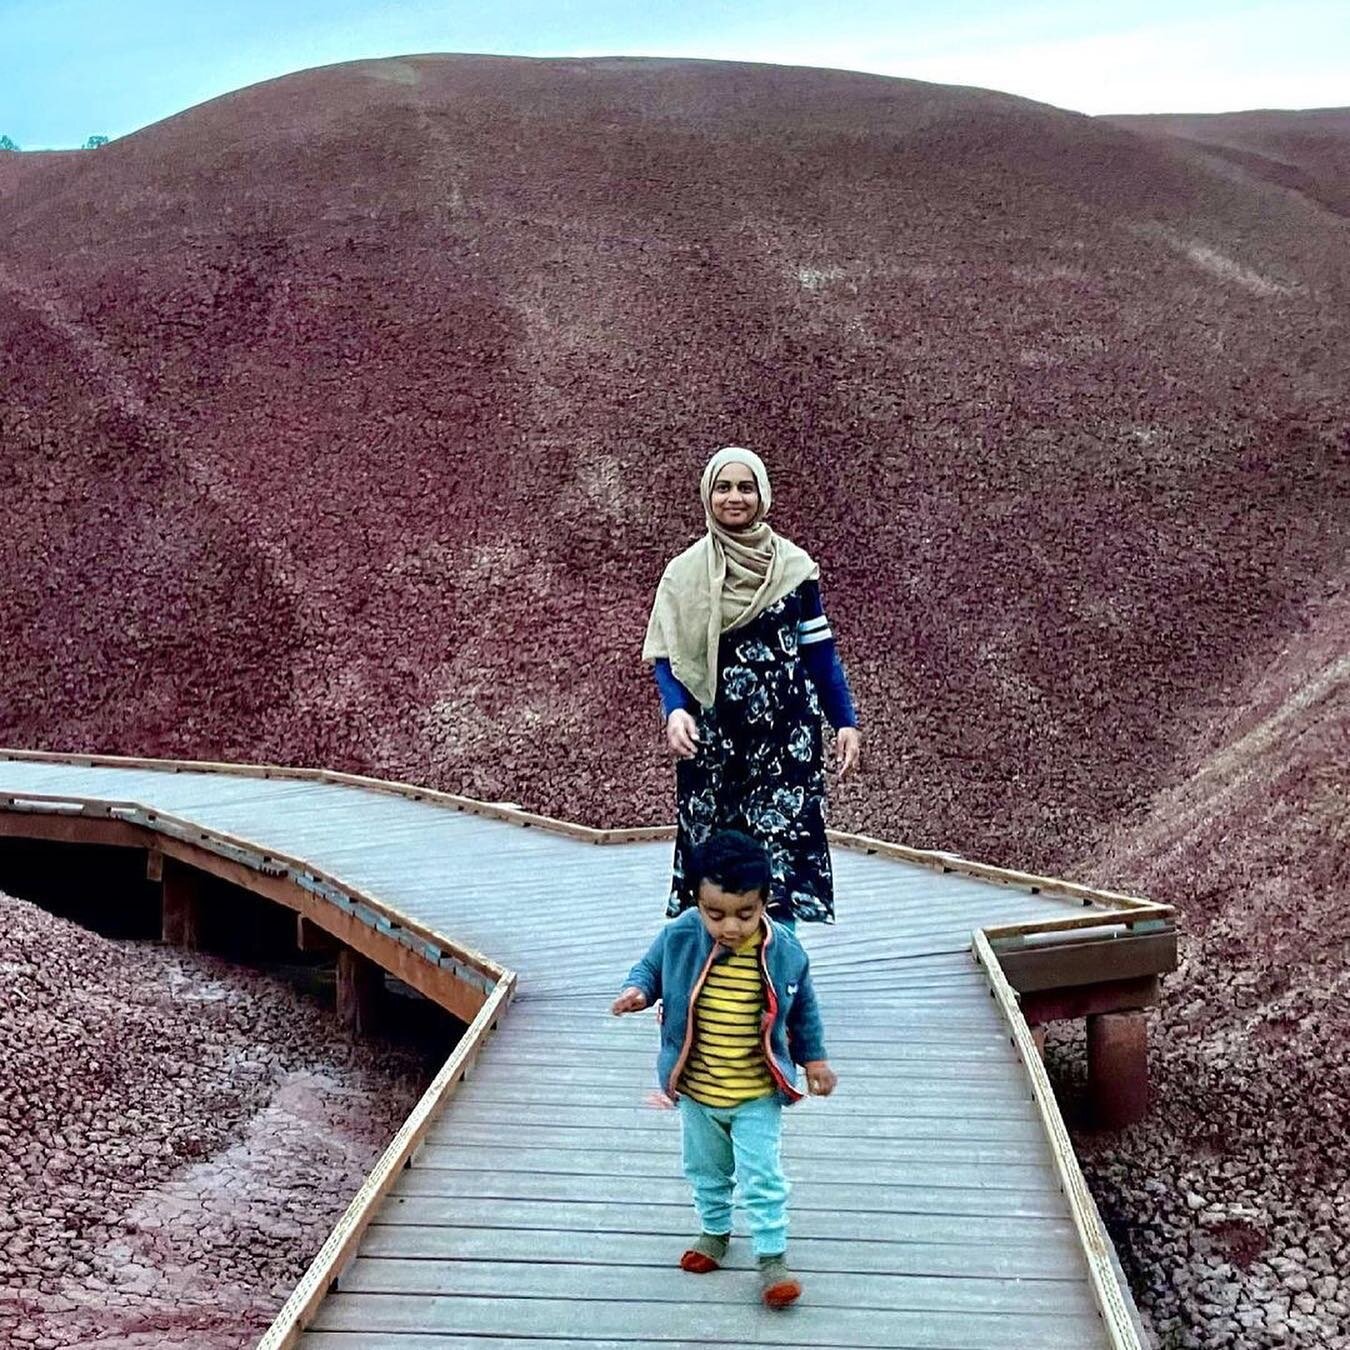 Have you been to Painted Hills?!
.
We are excited to learn more about this trail from @babyhikingadventures 
.
#elementsofwild #familyhike #mountainmama #thehikemovement #showthemtheworld #outdoorfamilyadventures #backpackingadventures #womenwhopaddl